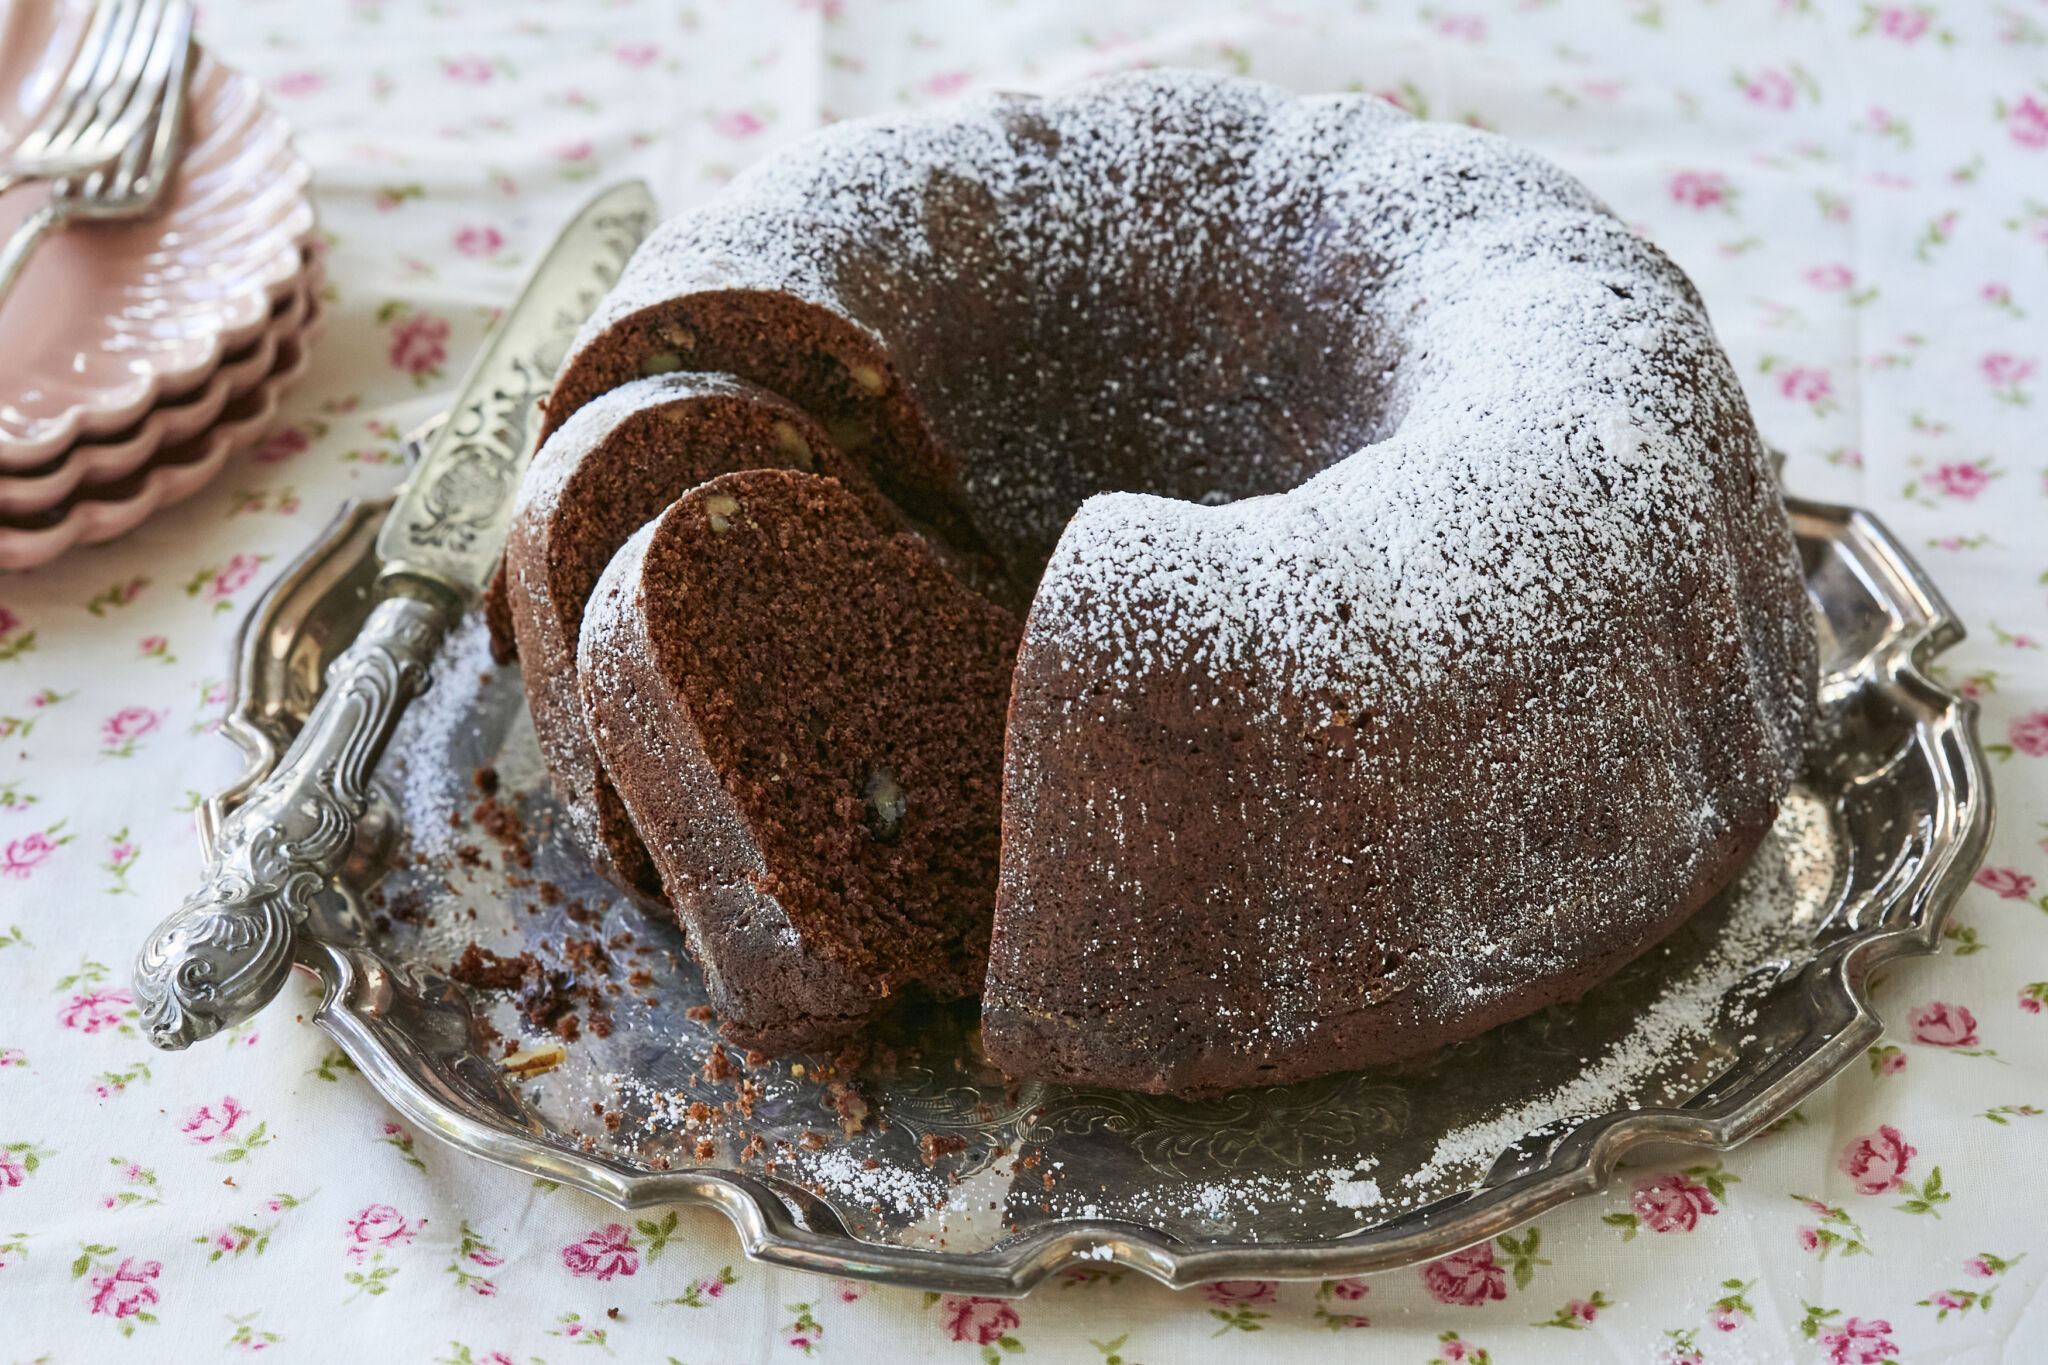 A homemade applesauce cake, baked in a bundt pan, is served on a silver tray. The cake has been sliced into, displaying bits of walnuts inside.